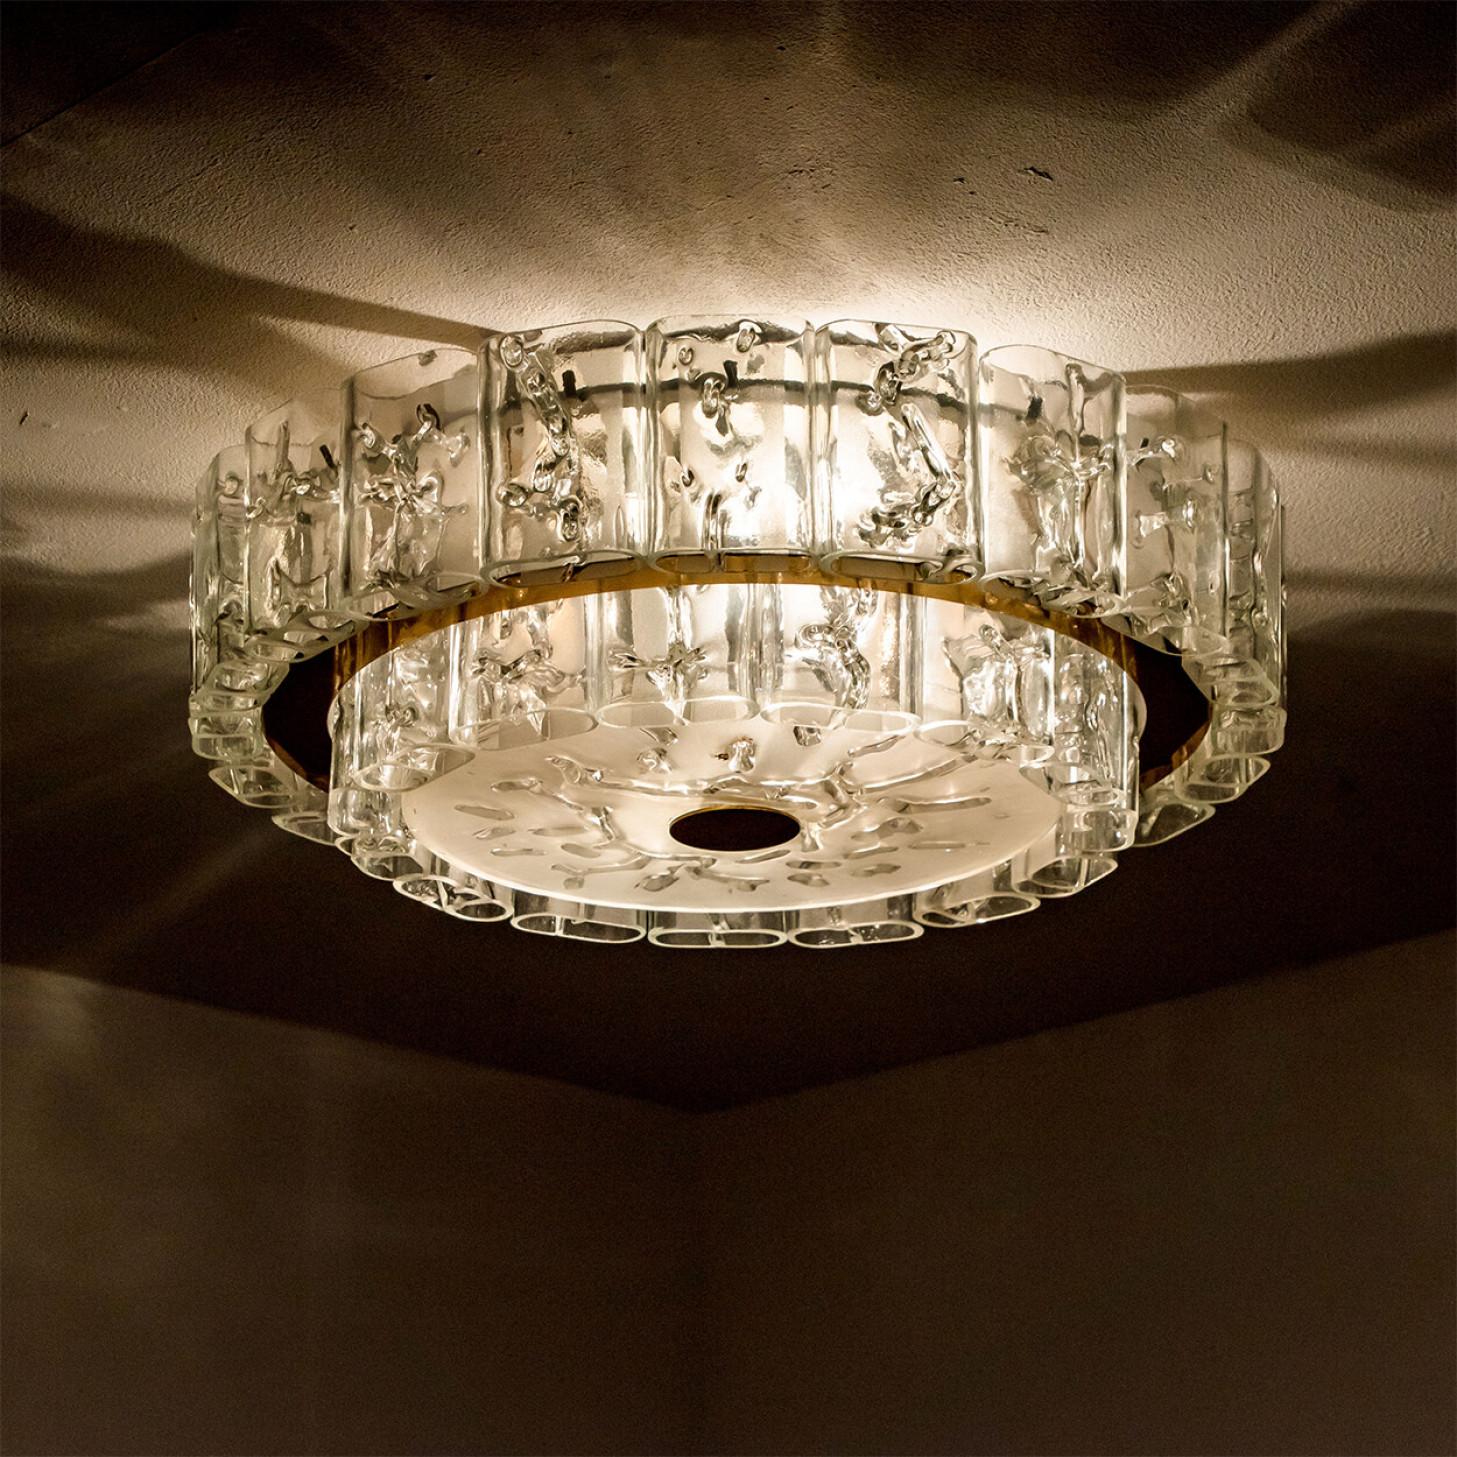 A beautiful Doria flush mount manufactured circa 1960.
High-end thick clear crystal glass shade made out of overlay glass, applied in rectangular shapes. Mind blowing lighting effect when lit!
Doria received the German award for design excellence,